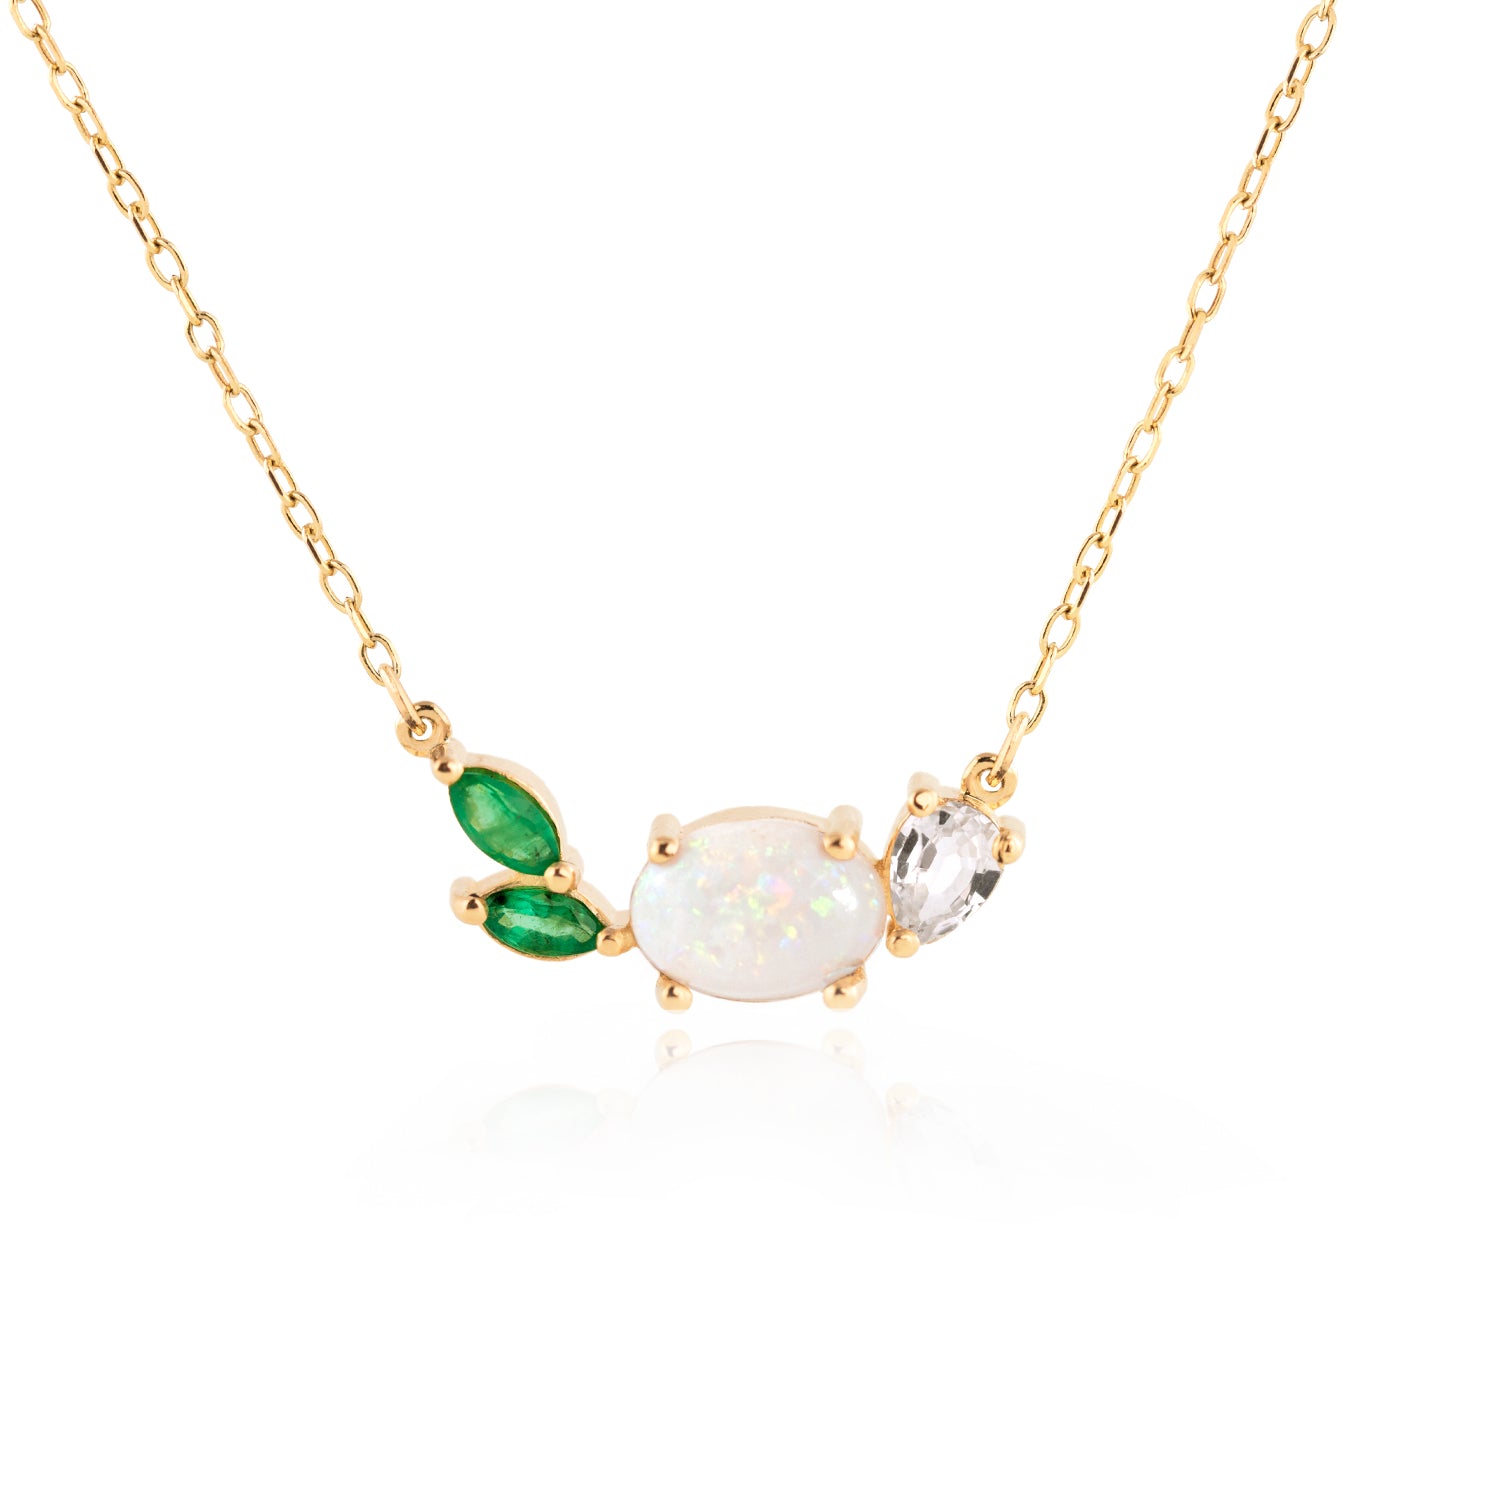 Opal Emerald Necklace by Jamie Park Jewelry This beautiful, 14K gold-cast necklace is inspired by the tranquility of a lush evergreen. Adorned with a cluster of gorgeous gemstones, including an Australian opal and two emeralds, it's finished with a sparkly pear-cut lab diamond.